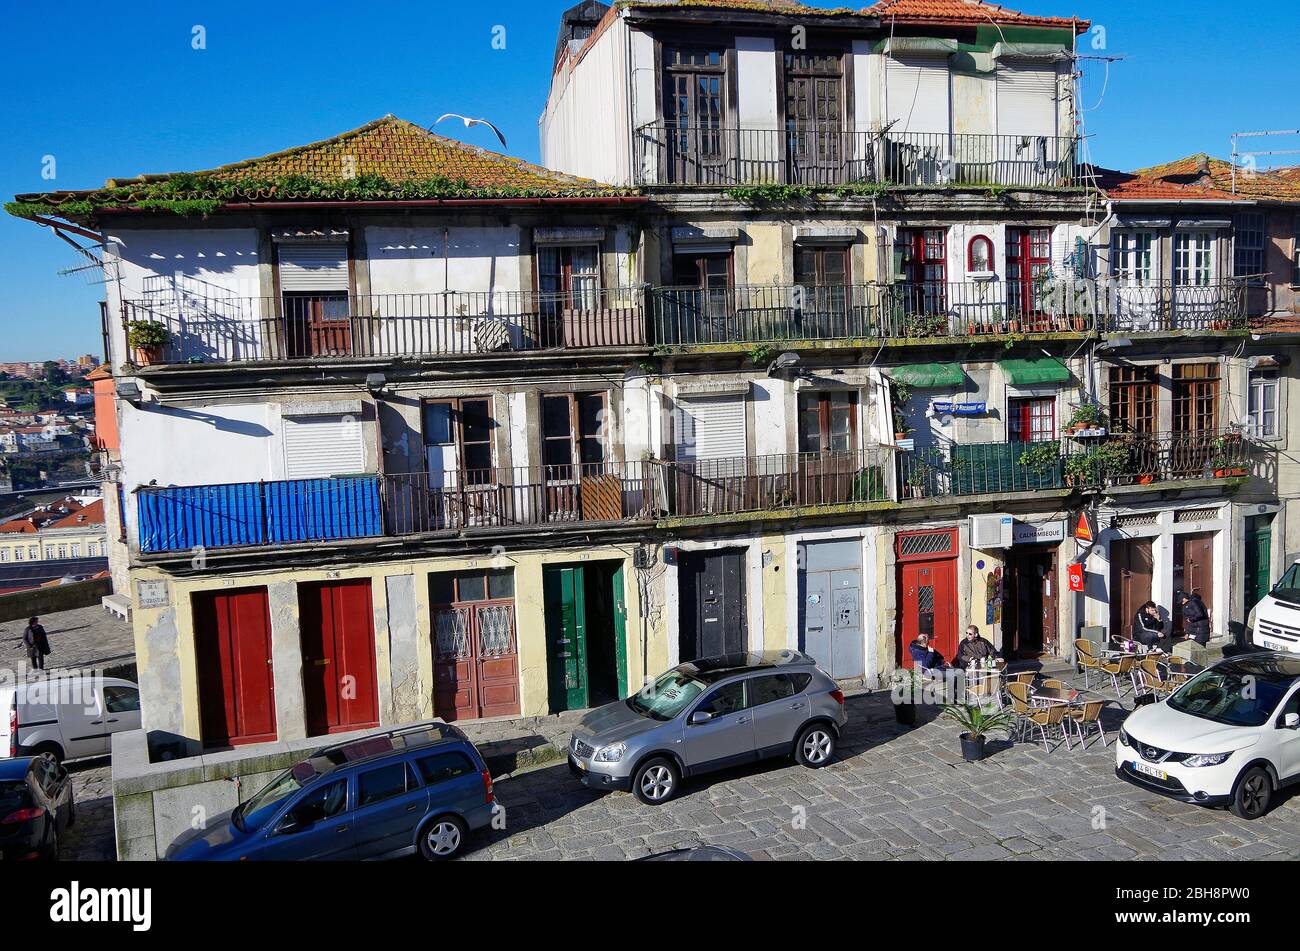 Picturesquely decaying row of old three & four storey residential buildings with multi-coloured front doors and iron balustraded balconies, in Porto Stock Photo